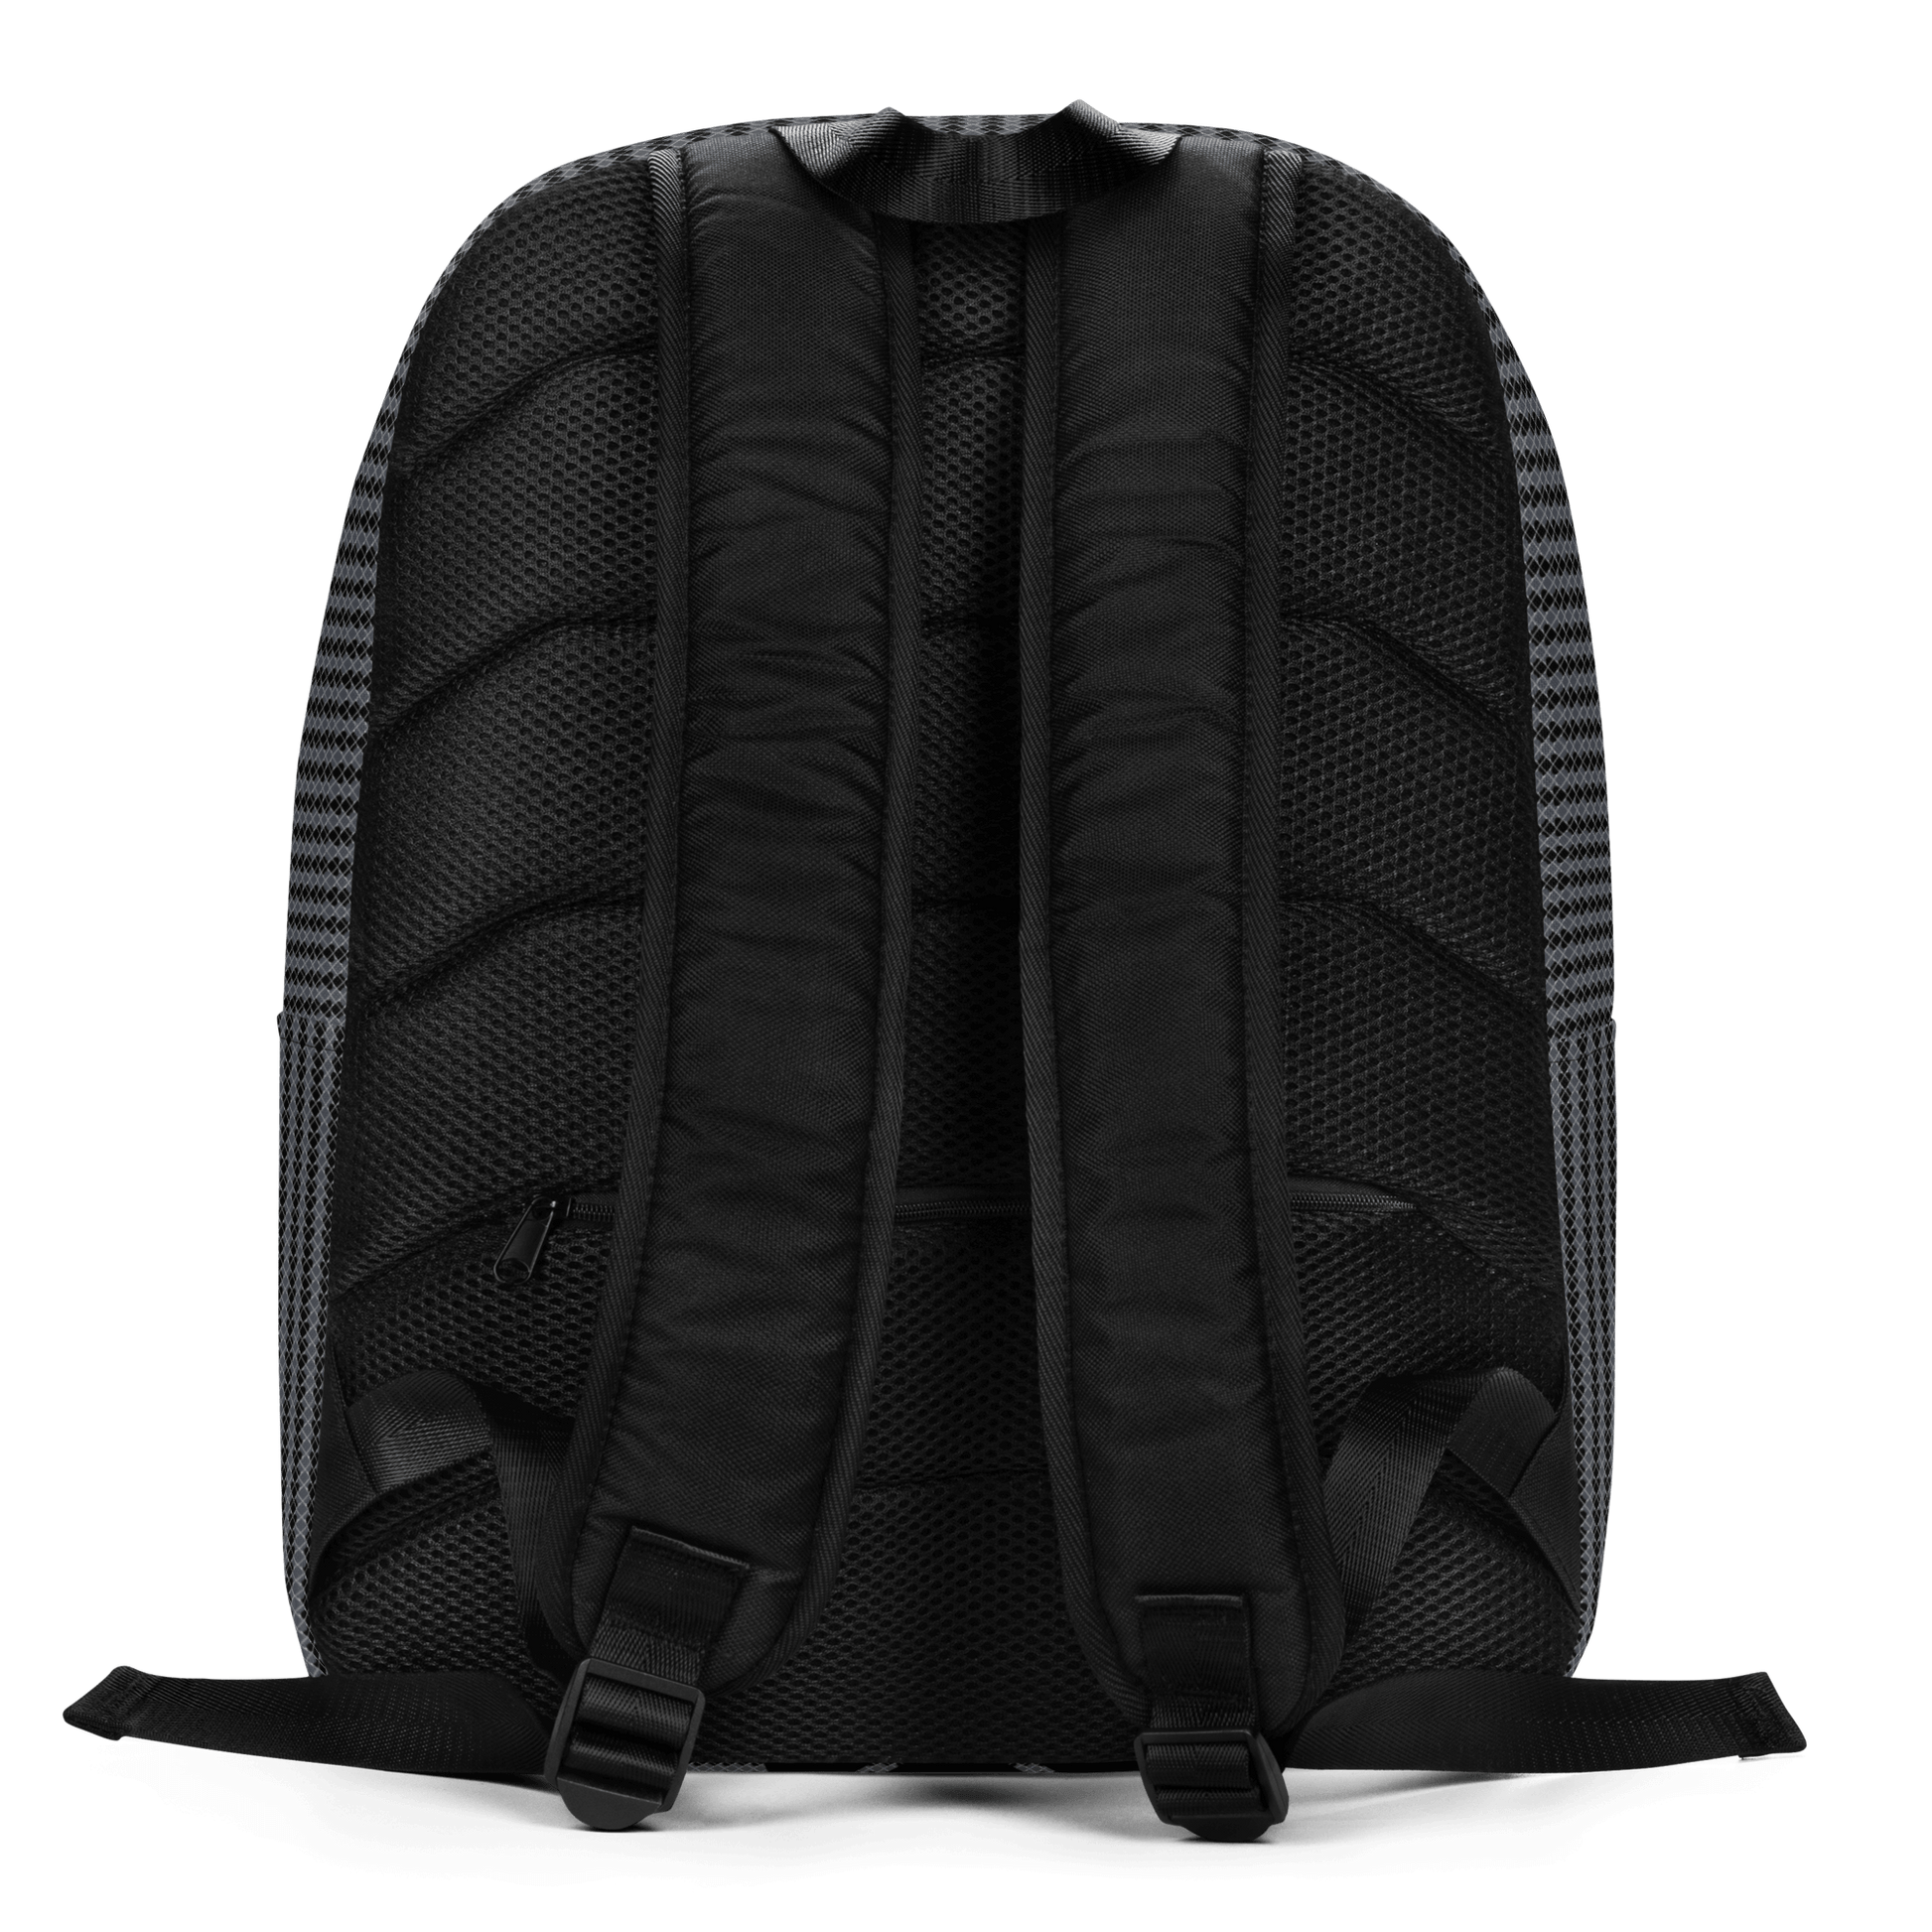 back view Black Lovogram SimplyHeart Backpack with Geometric Hearts